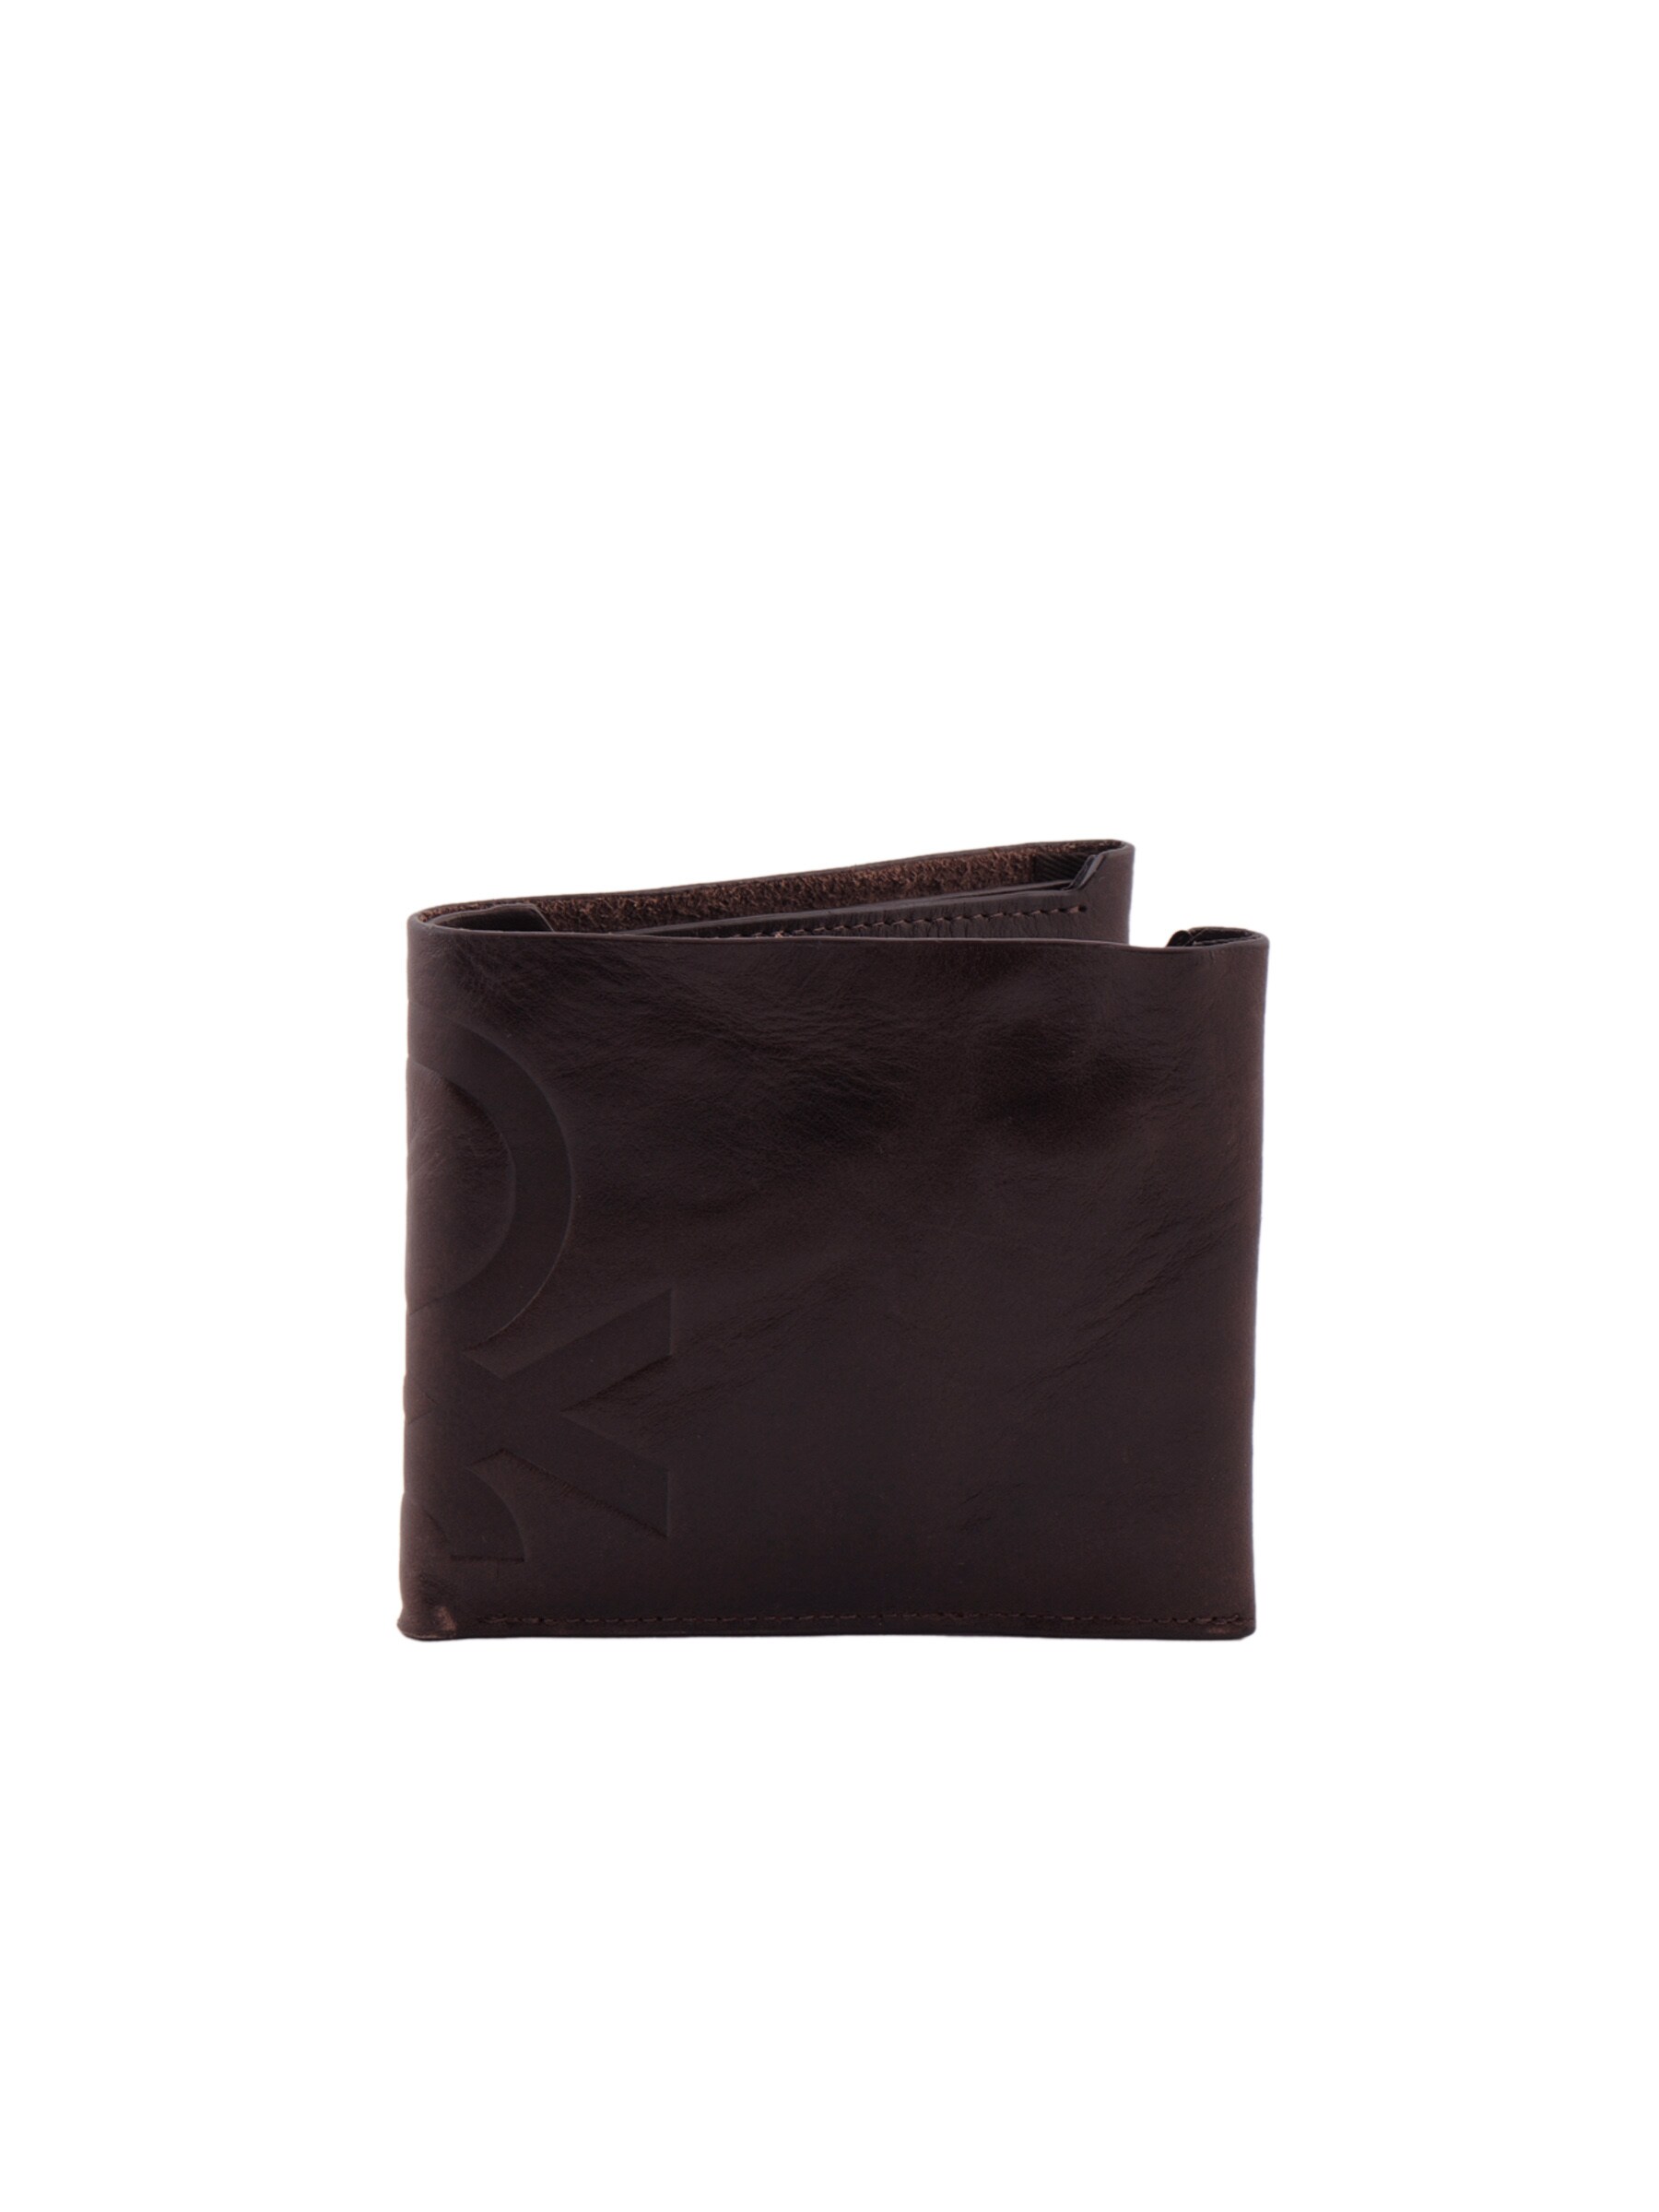 United Colors of Benetton Men Solid Coffee Brown Wallets